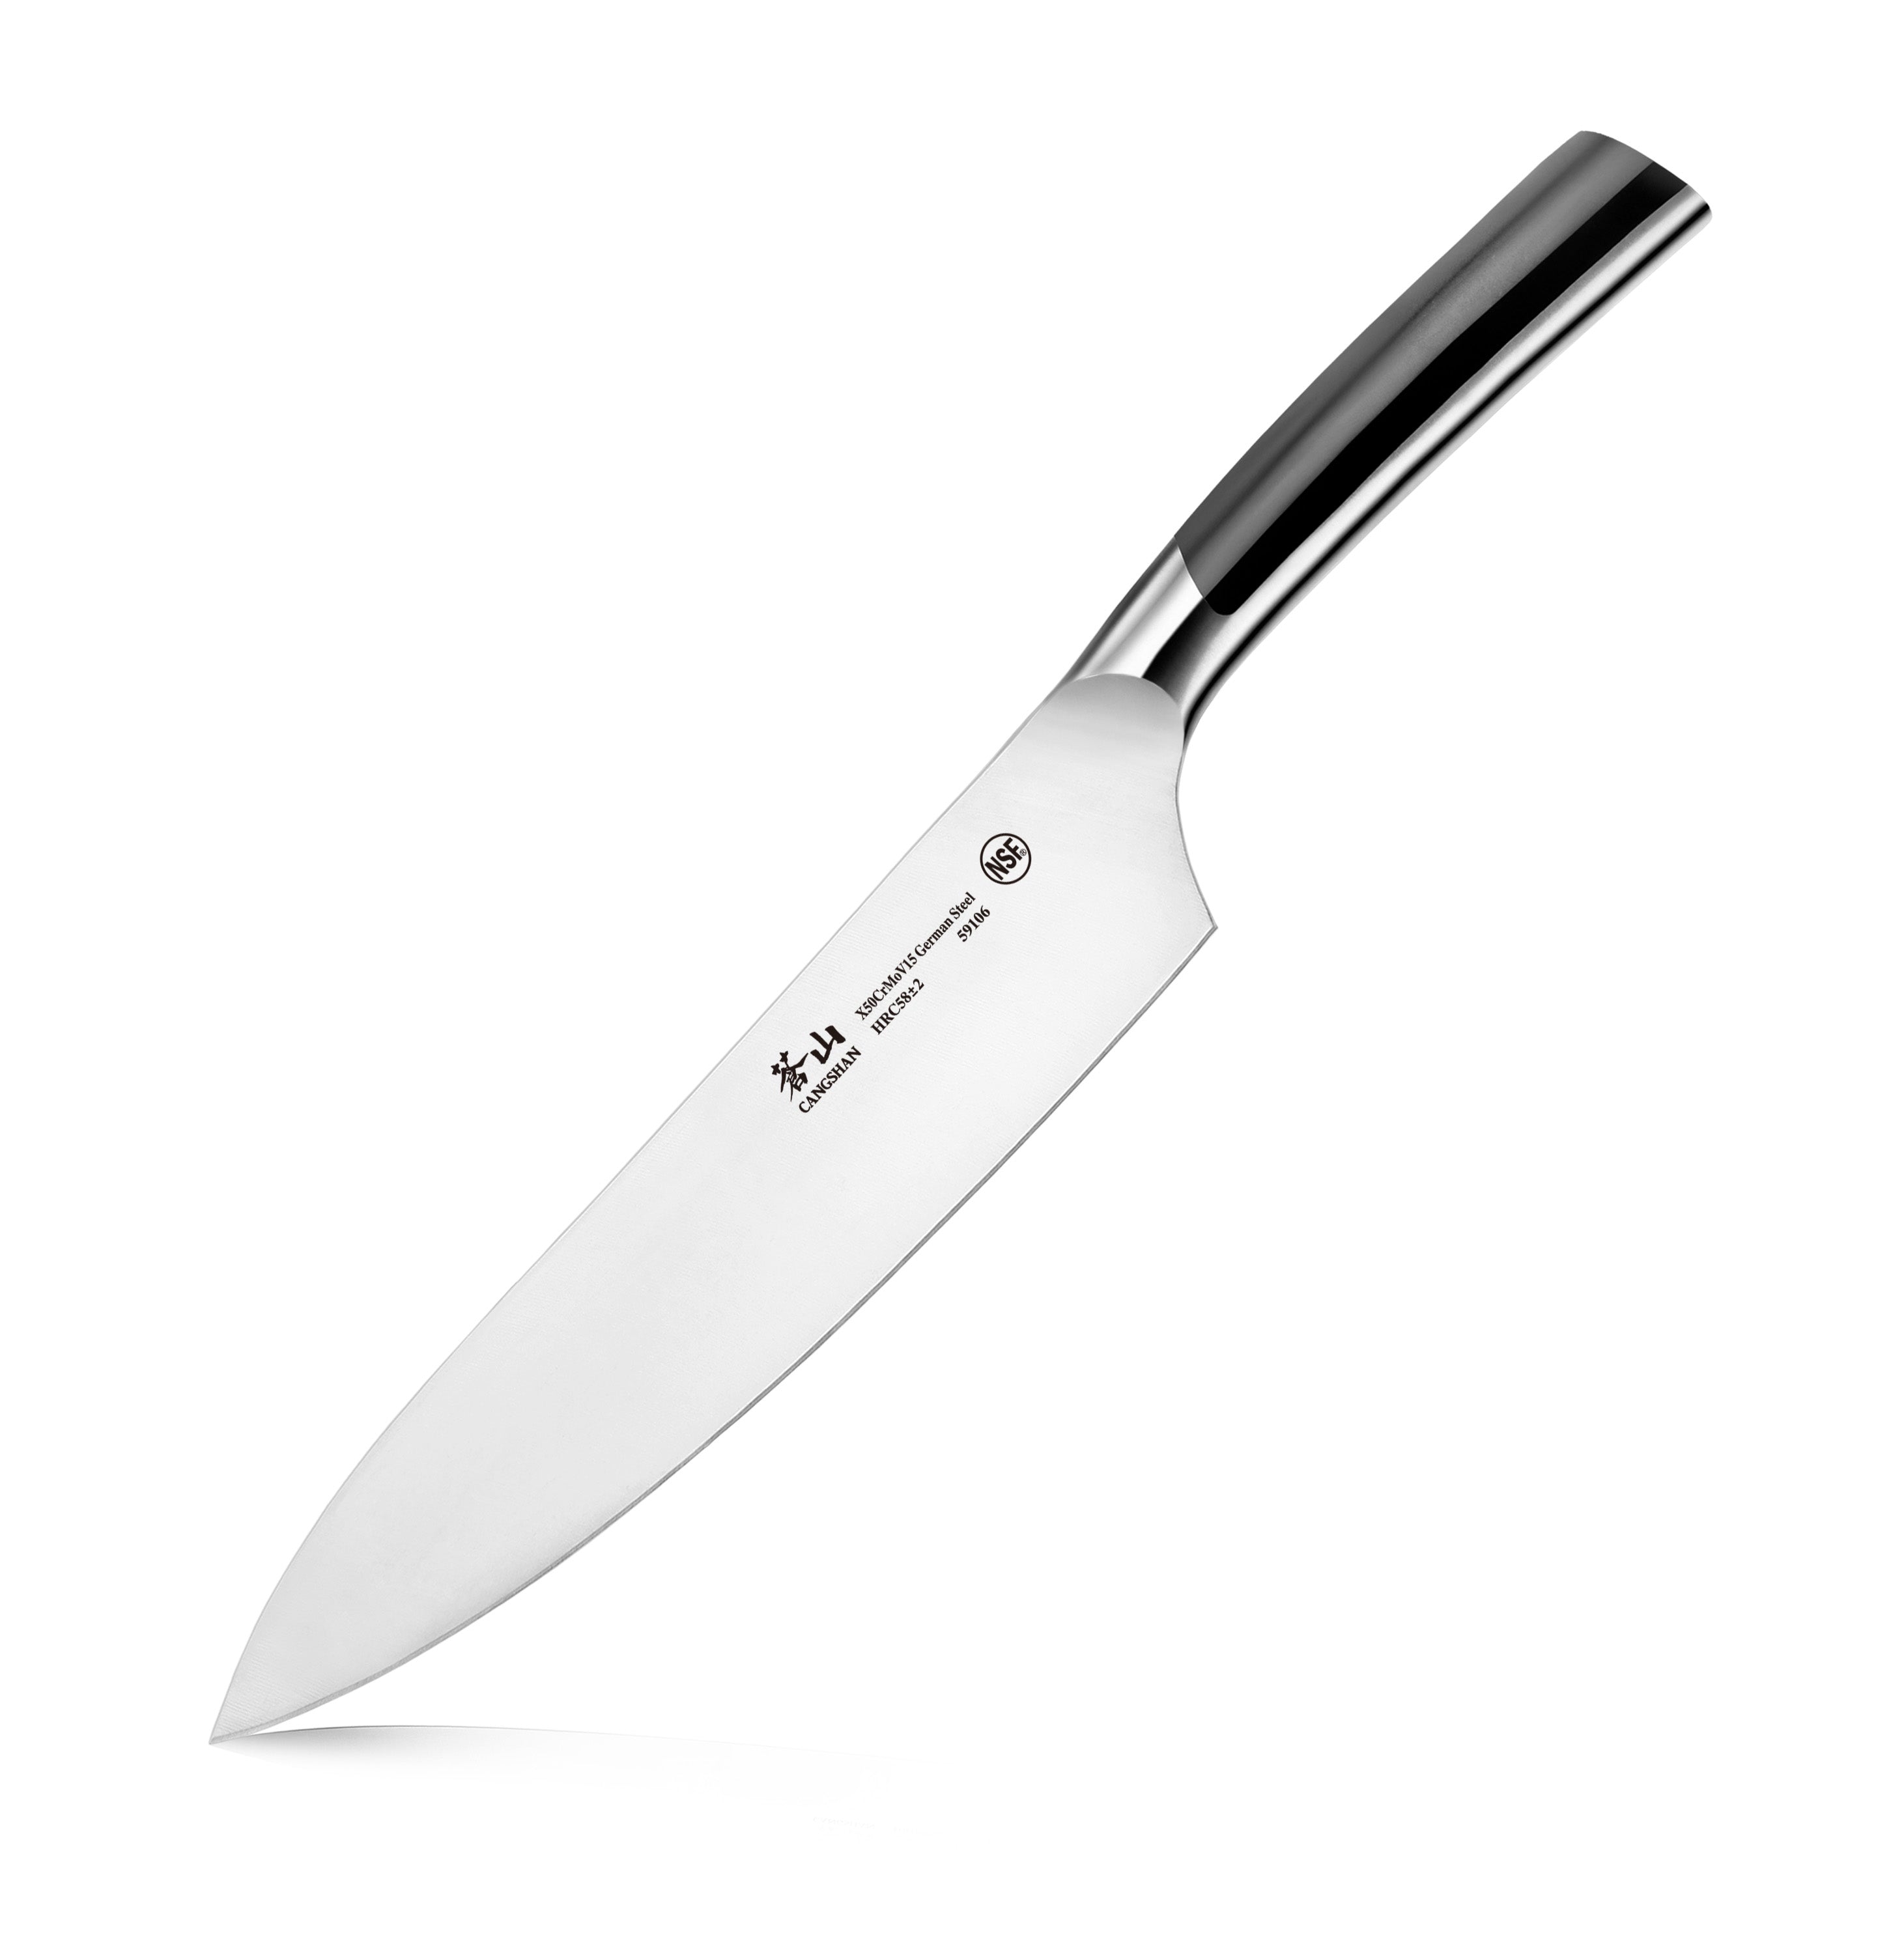 ALPS Series 8-Inch Chef's Knife with Sheath, Forged German Steel, Blac –  Cangshan Cutlery Company